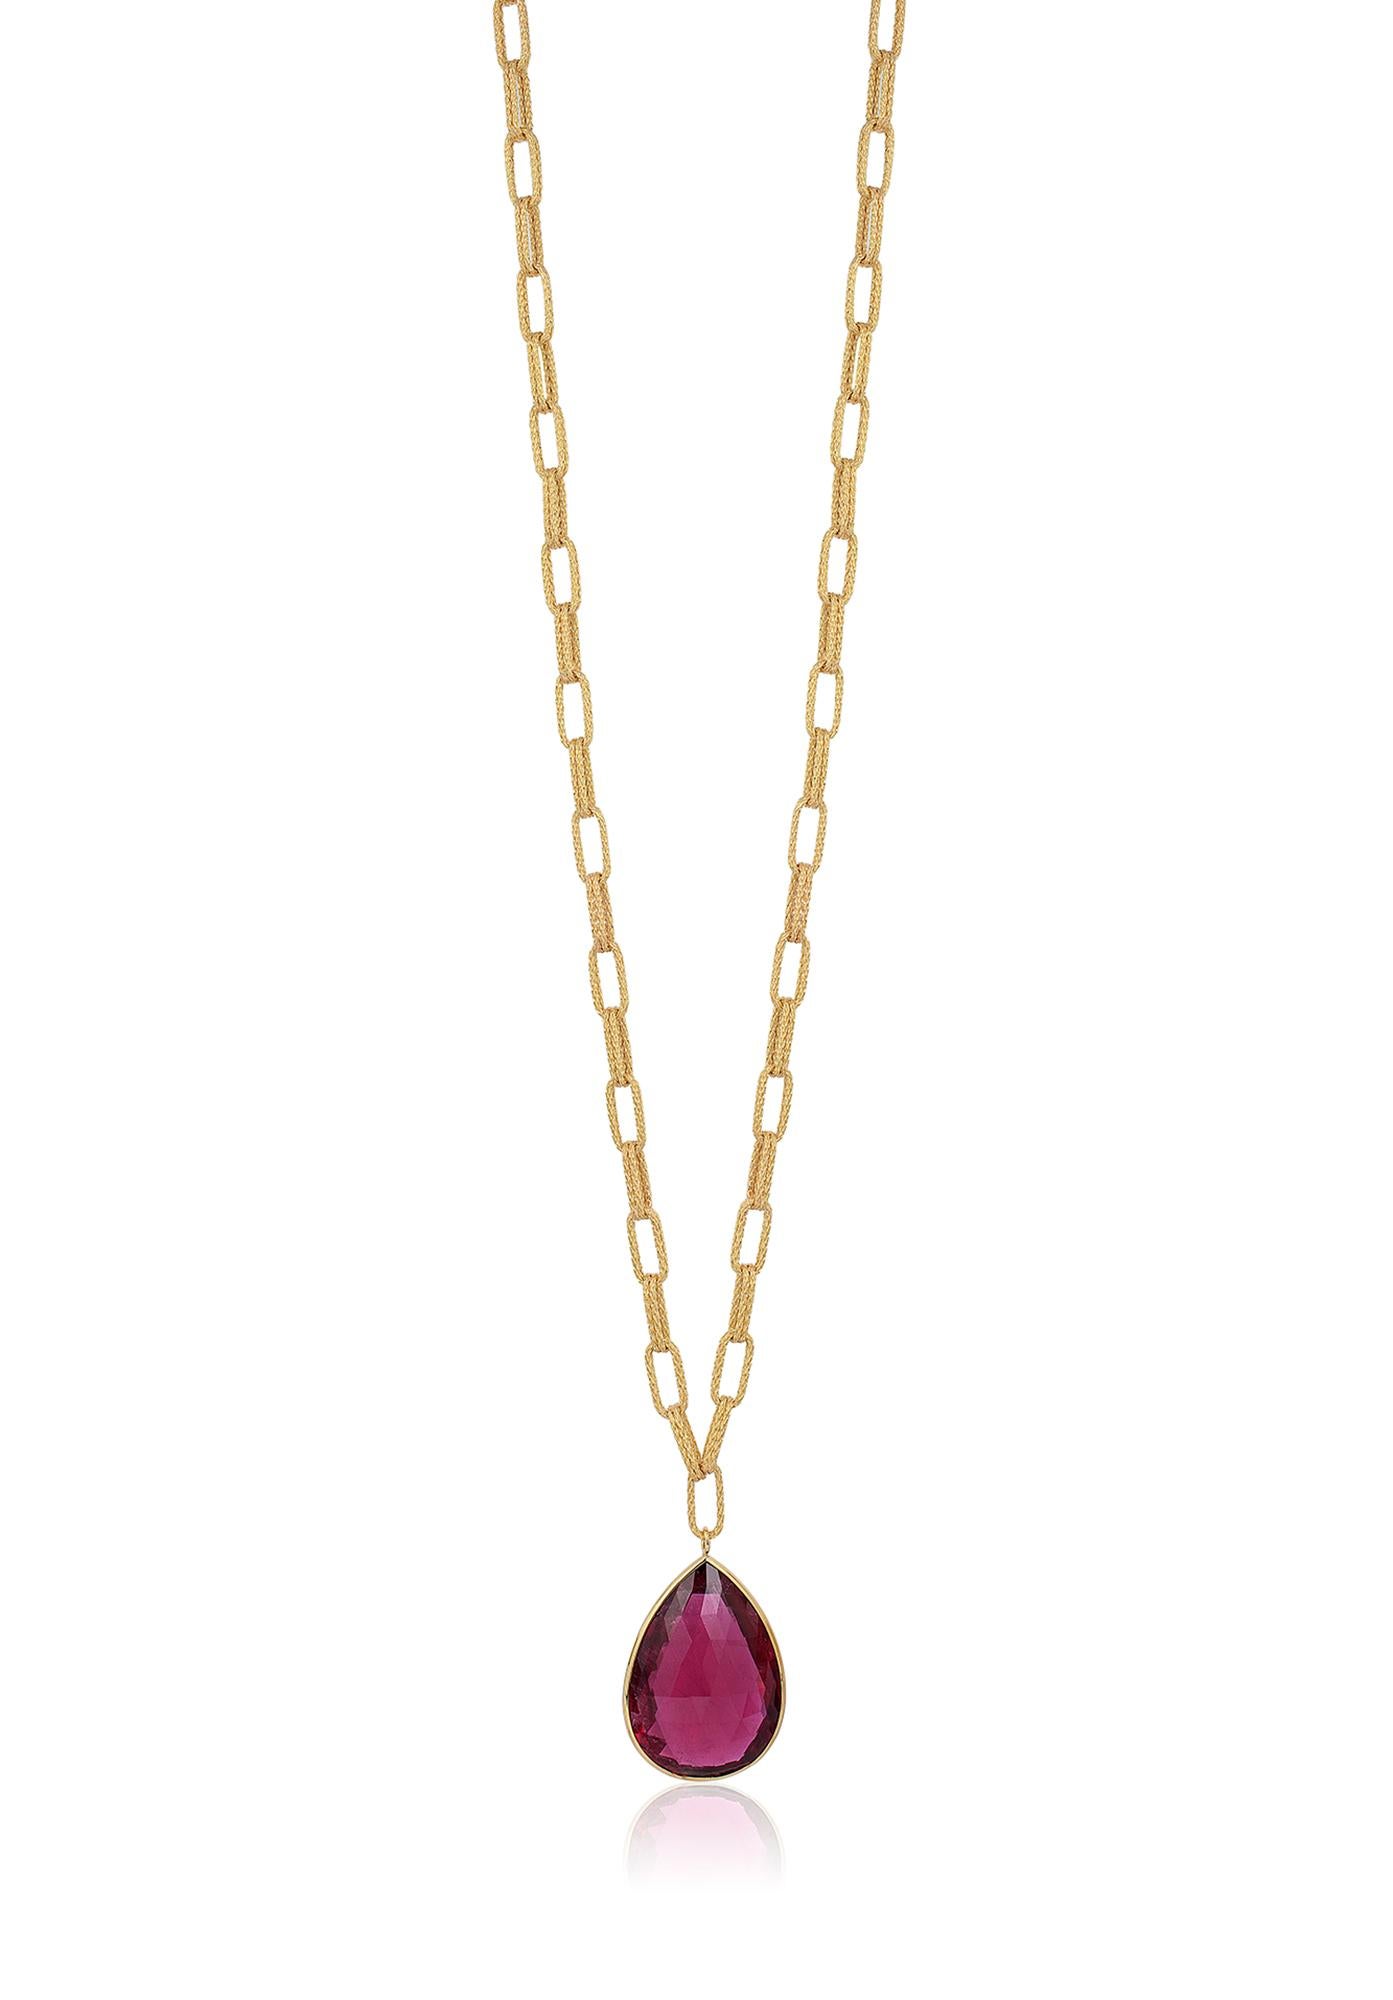 This Rubelite Briolette with Large Textured Flat Chain Necklace in 18K Yellow Gold is a stunning piece of jewelry from the 'G-One' collection. This necklace features a beautiful Rubelite Briolette, which is a type of gemstone that is prized for its